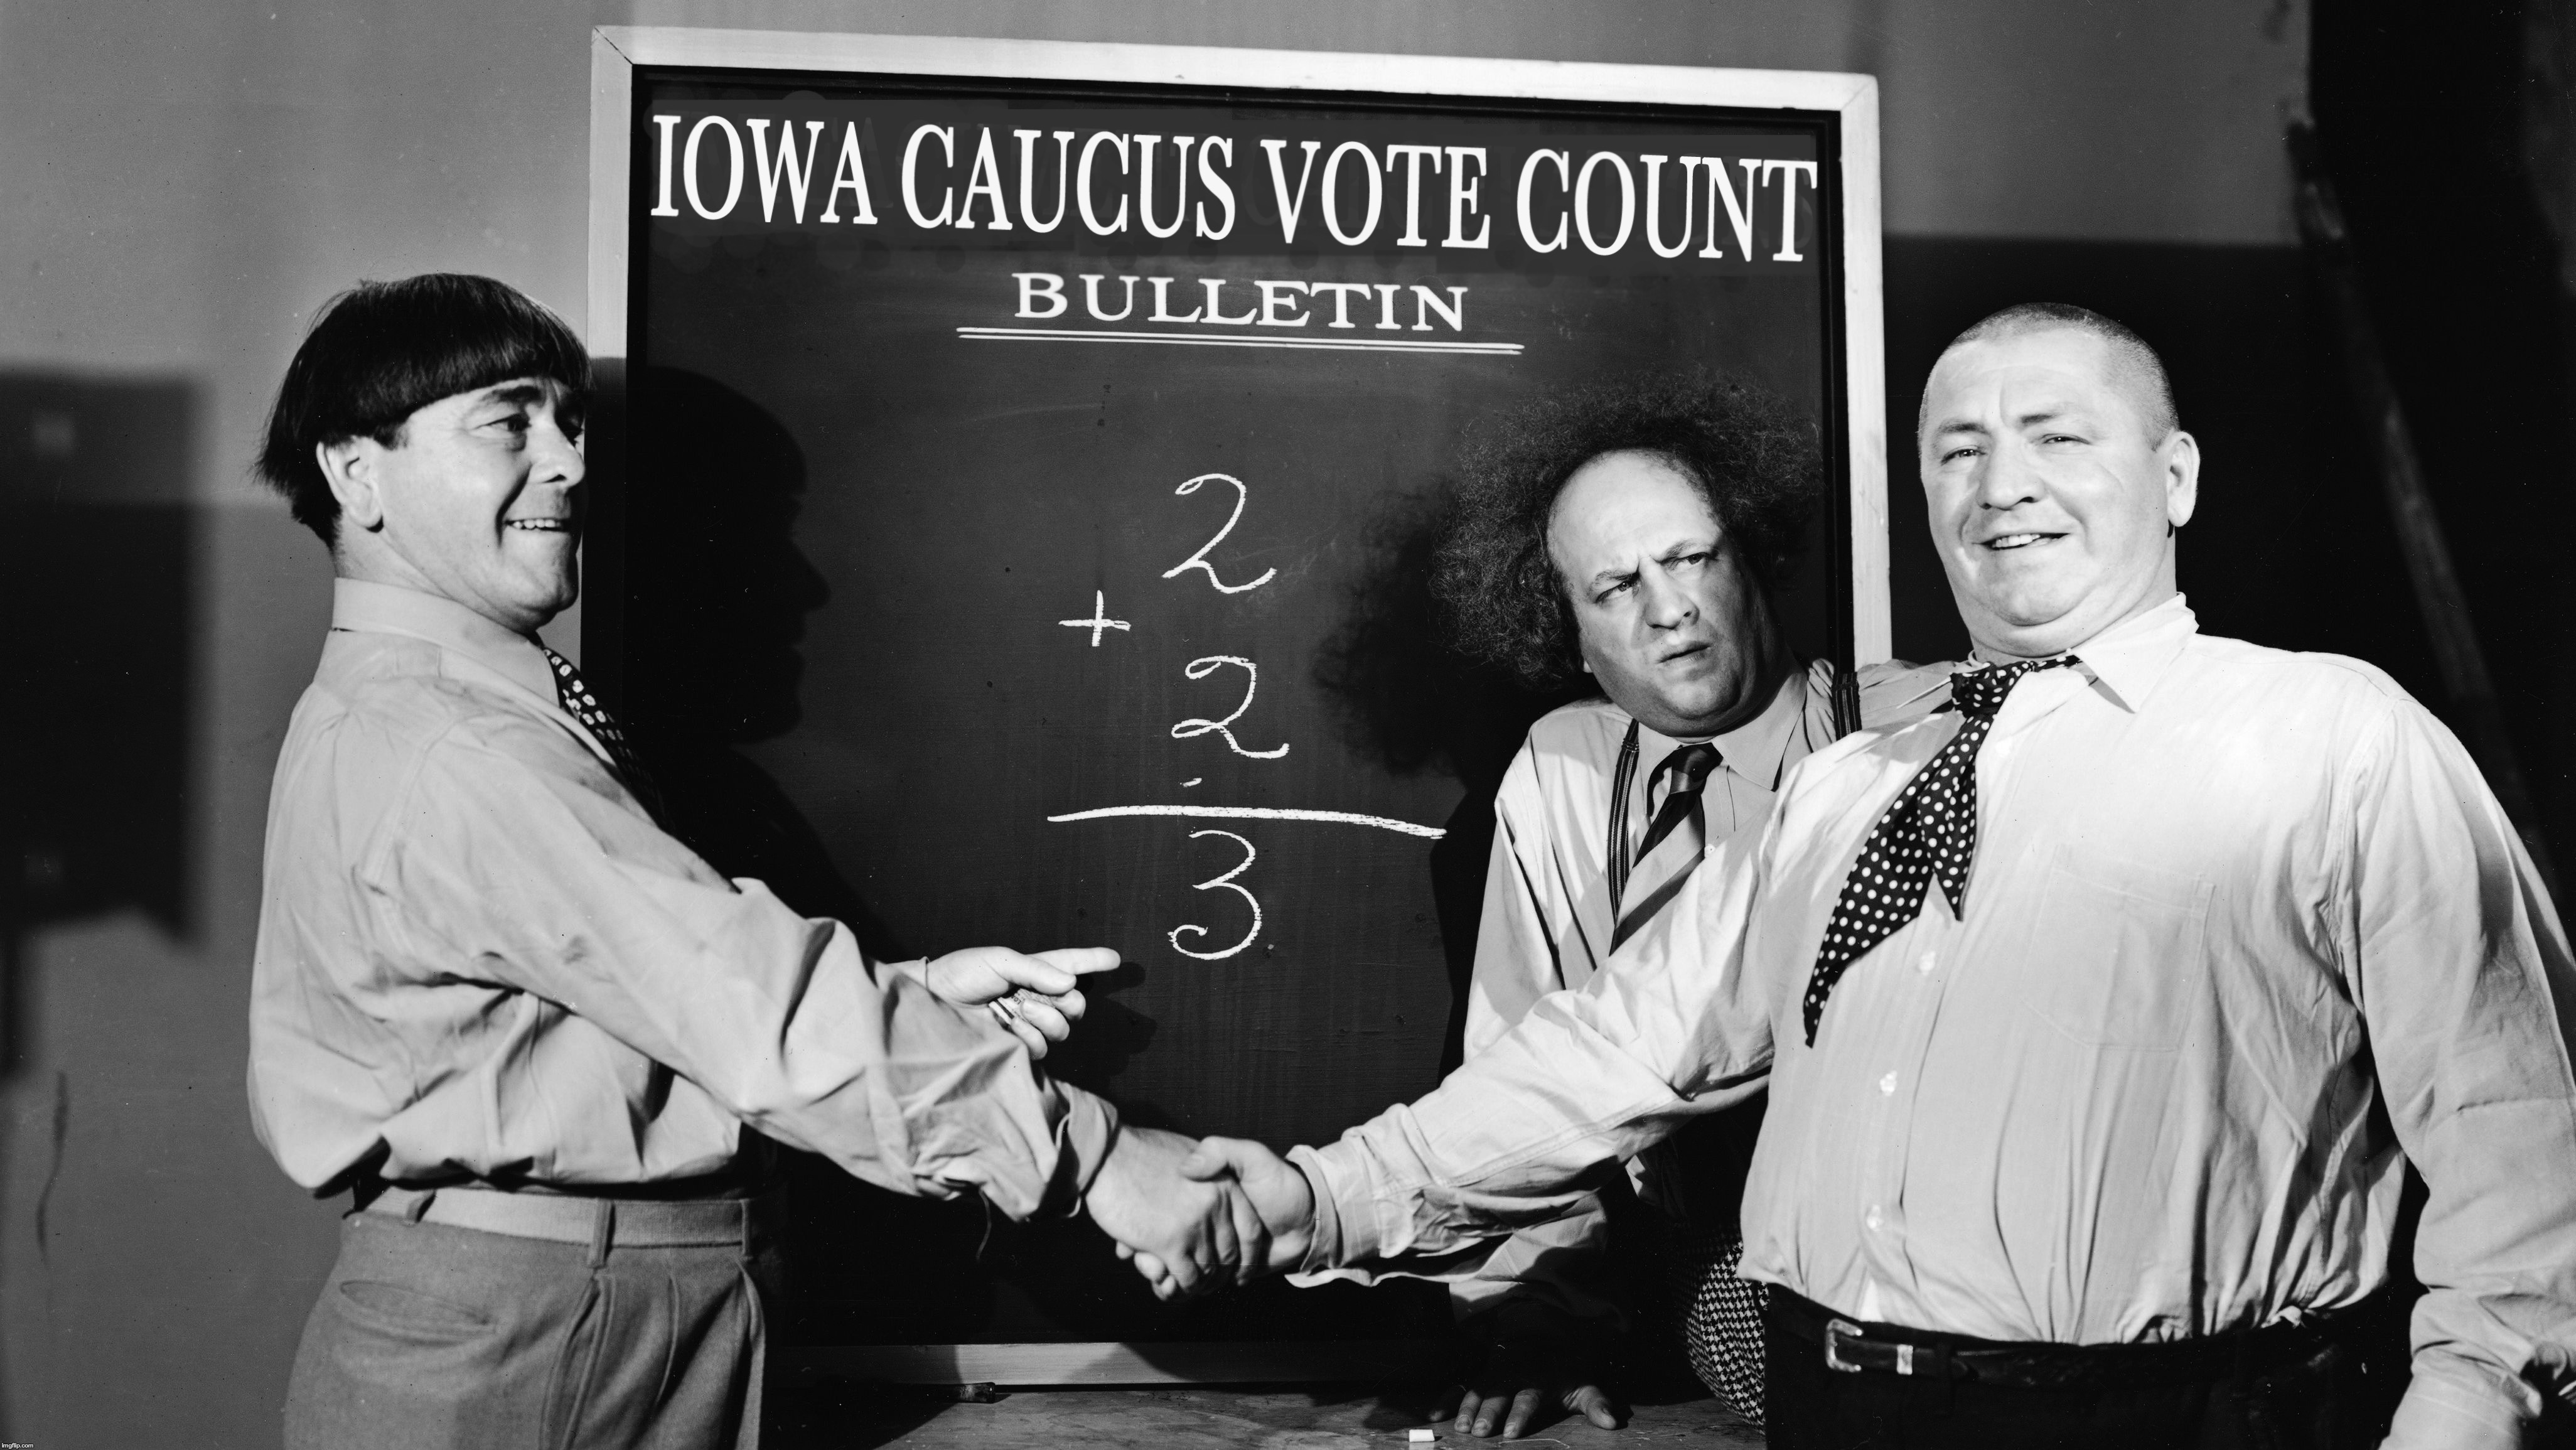 we've almost got it, Moe! | B | image tagged in three stooges,iowa caucus | made w/ Imgflip meme maker